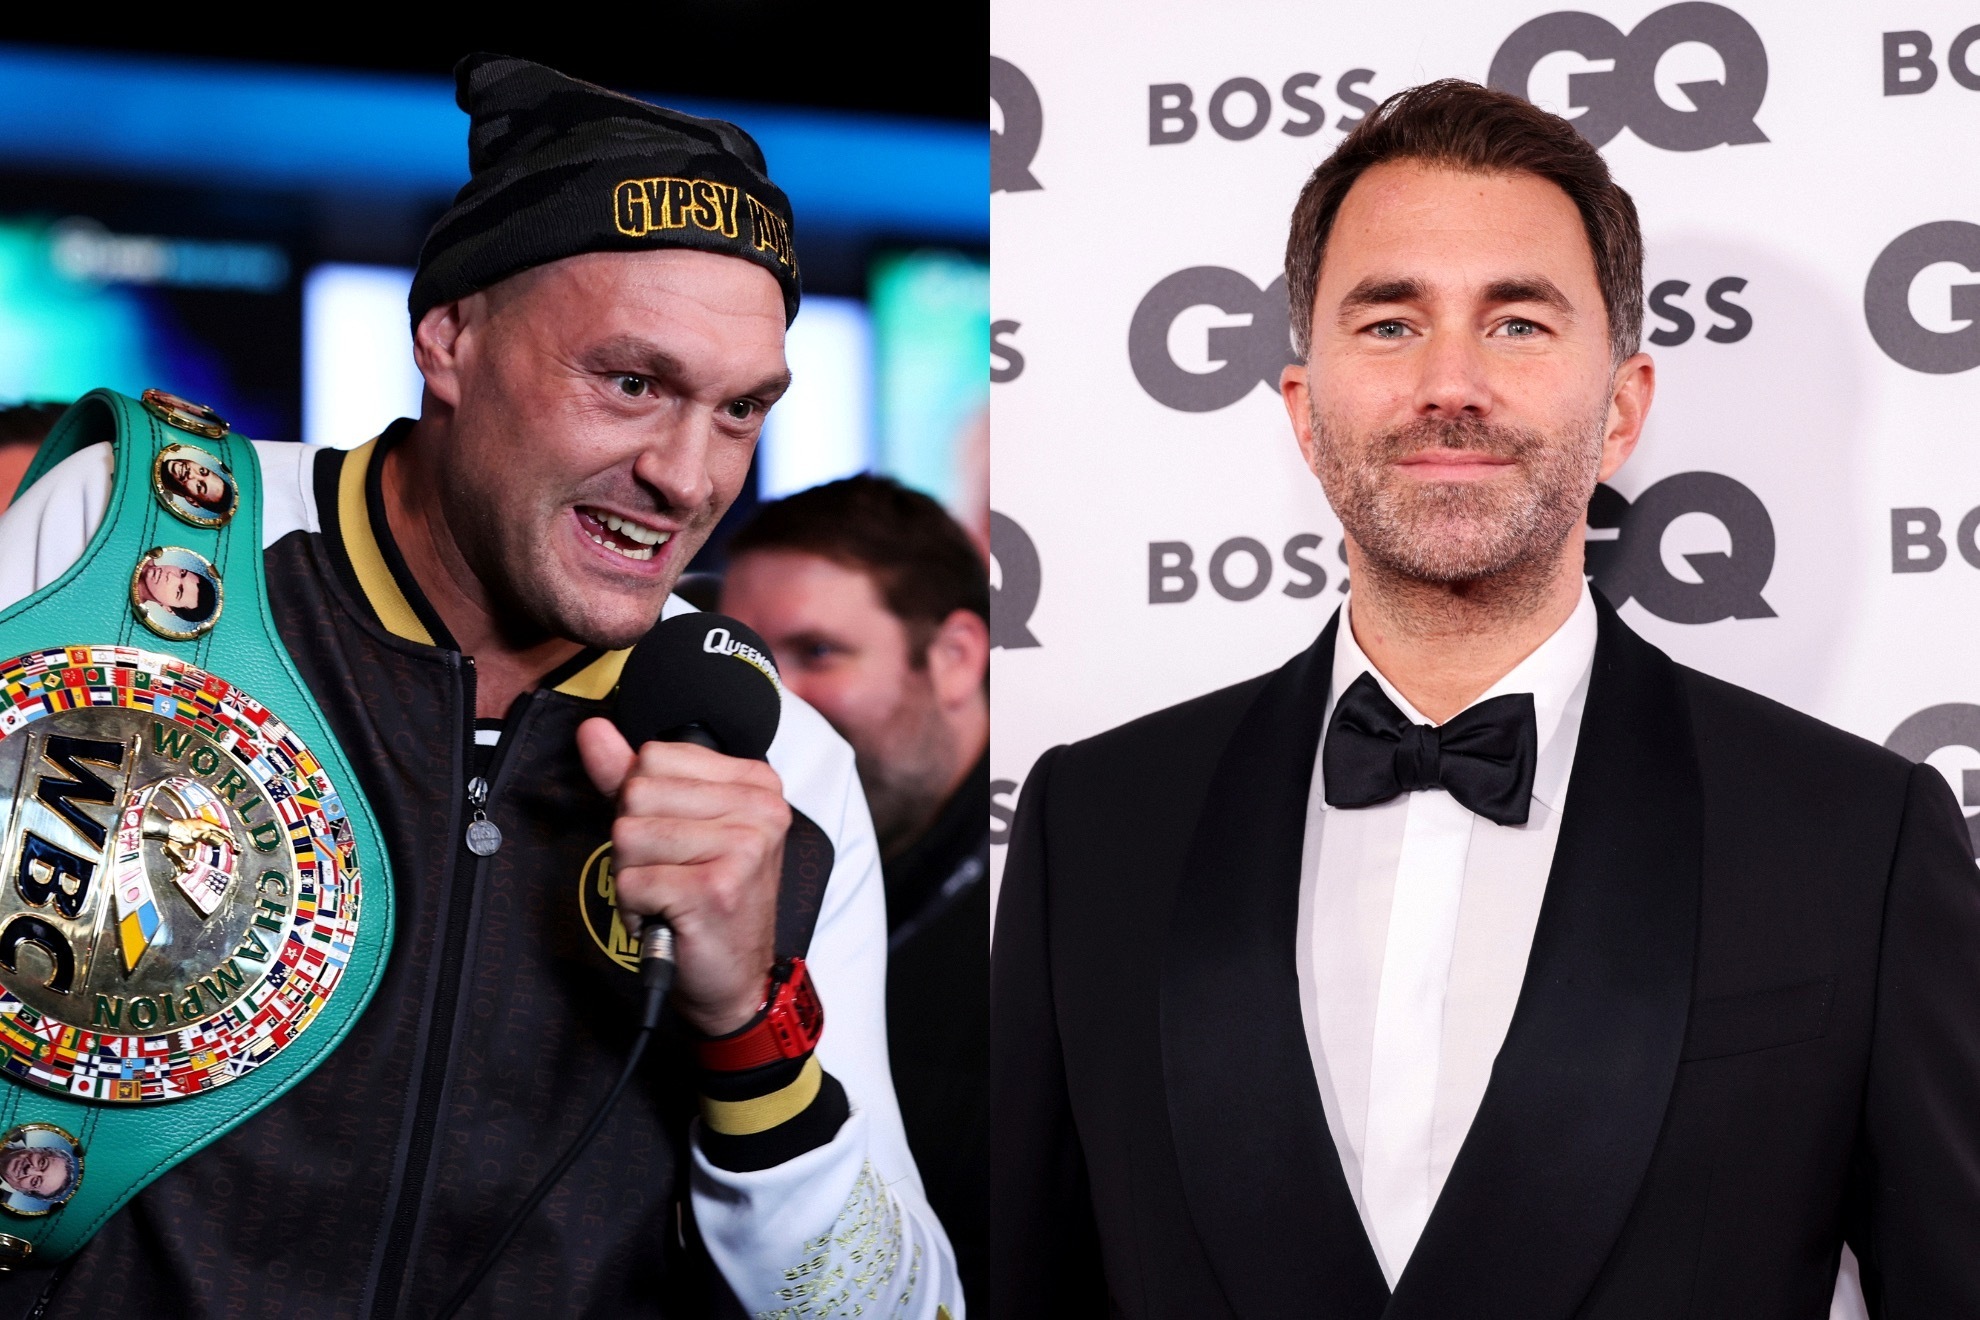 Tyson Fury's fight against UFC champion Francis Ngannou has come under fire from boxing purists like Eddie Hearn.